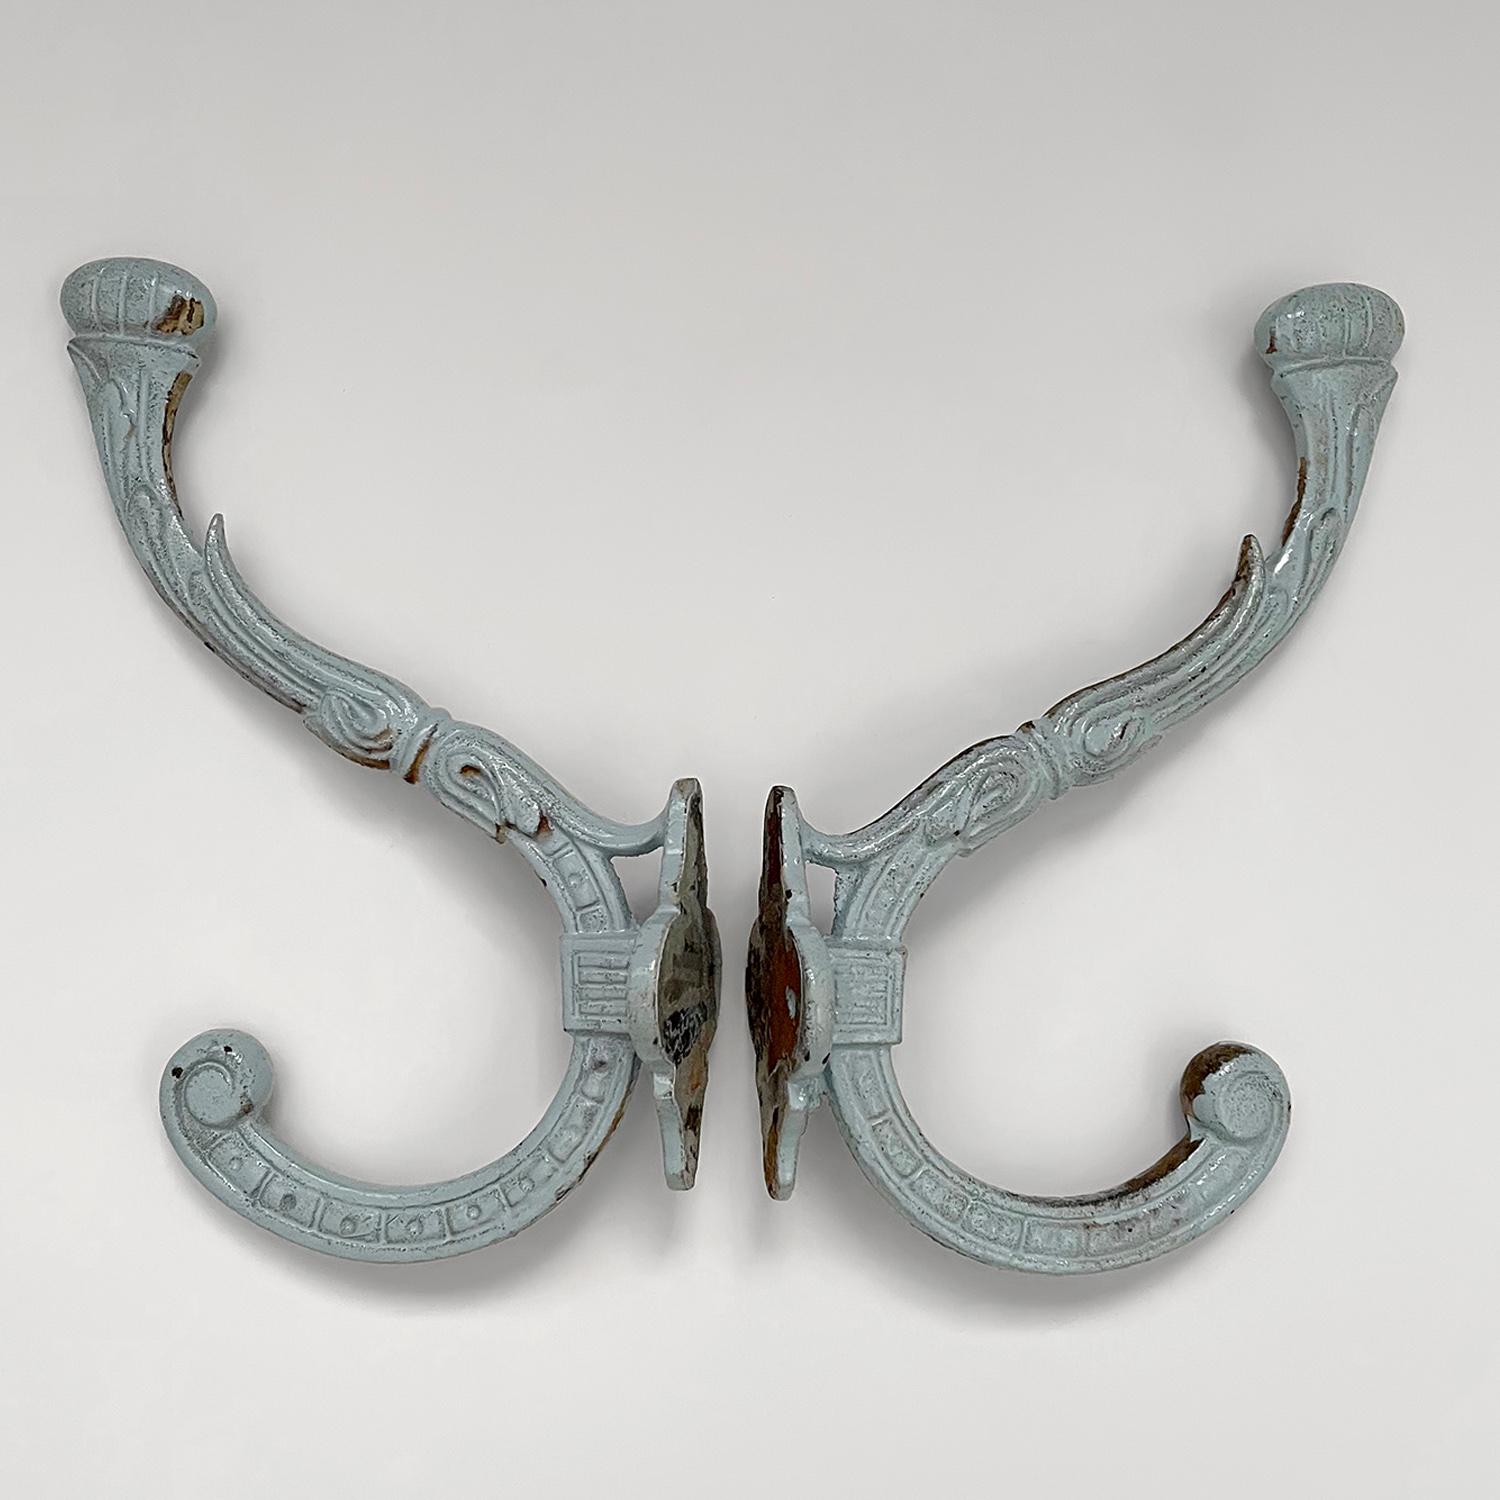 Pair of French enameled iron hooks
France, Early 20th century 
Pale French blue enamel paint has minor loss over stamped iron frame 
Wonderfully worn in and ready for years more love and service
Curved iron J hook finished with two hooks providing